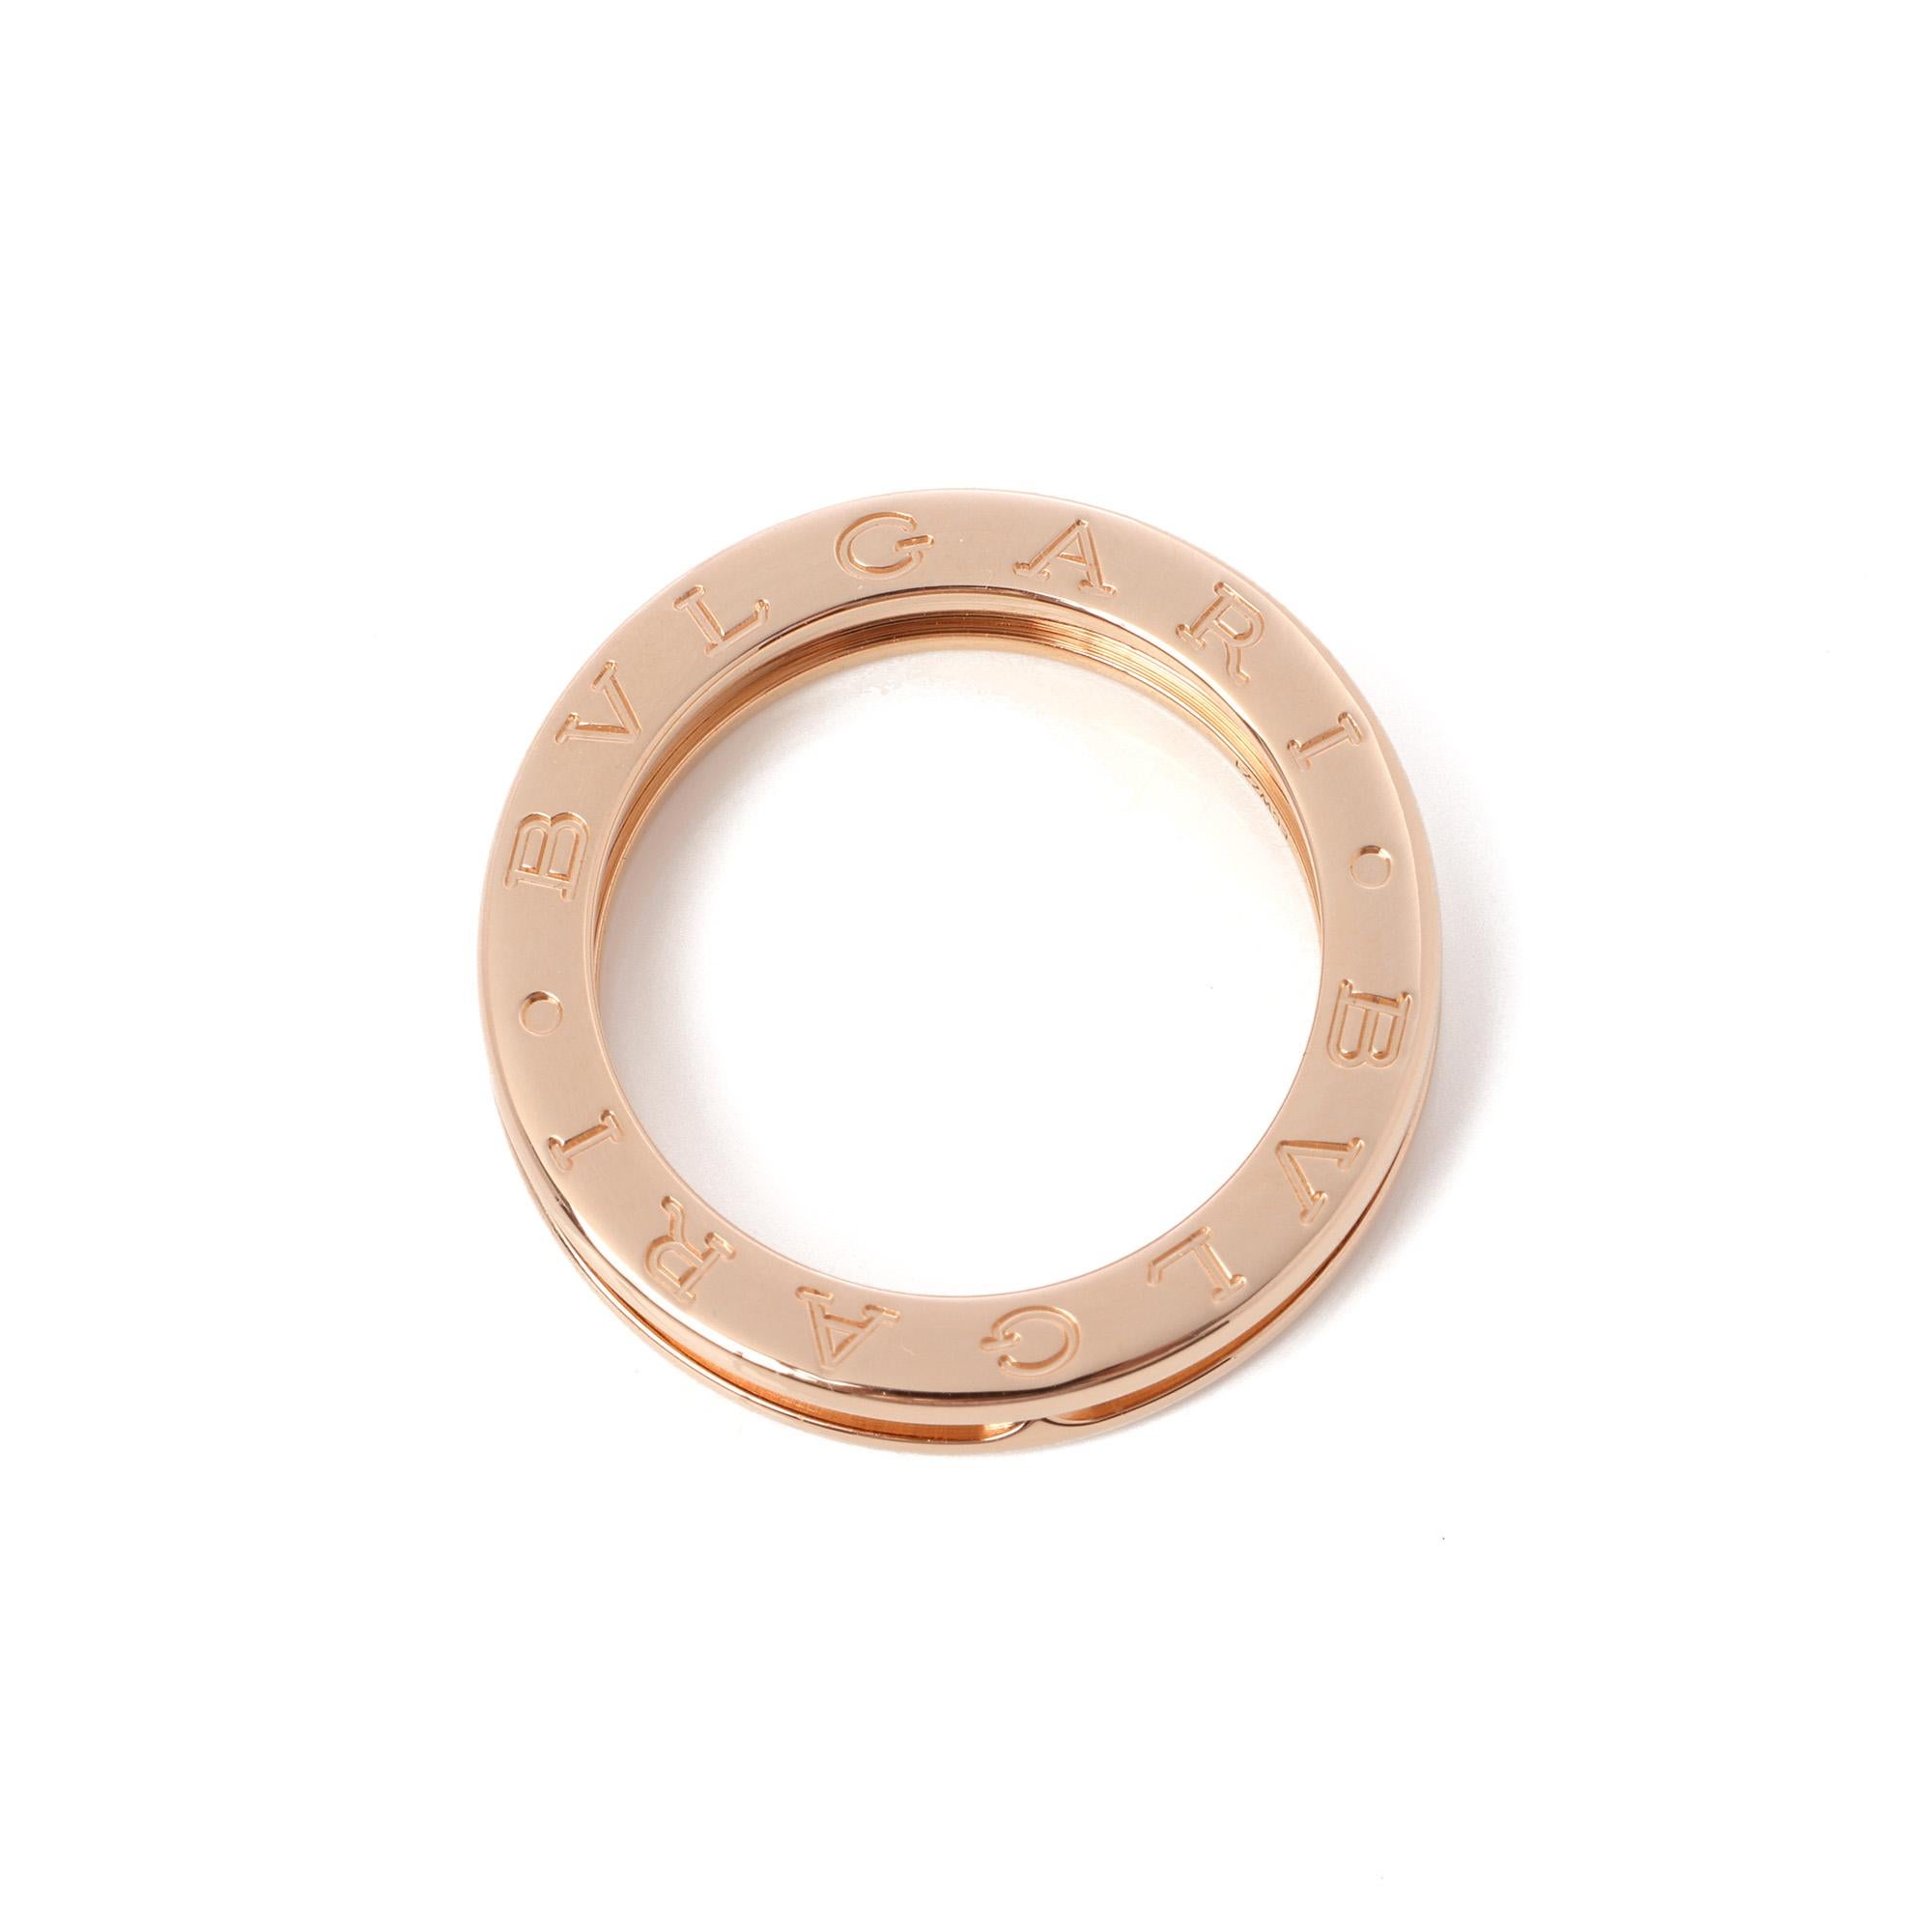 his ring by Bulgari is from their B Zero 1 Collection and features a distinctive one band spiral design in Rose Gold. Accompanied by a Bulgari Box and Authenticity Card. Our Xupes reference is J934 should you need to quote this.
ITEM